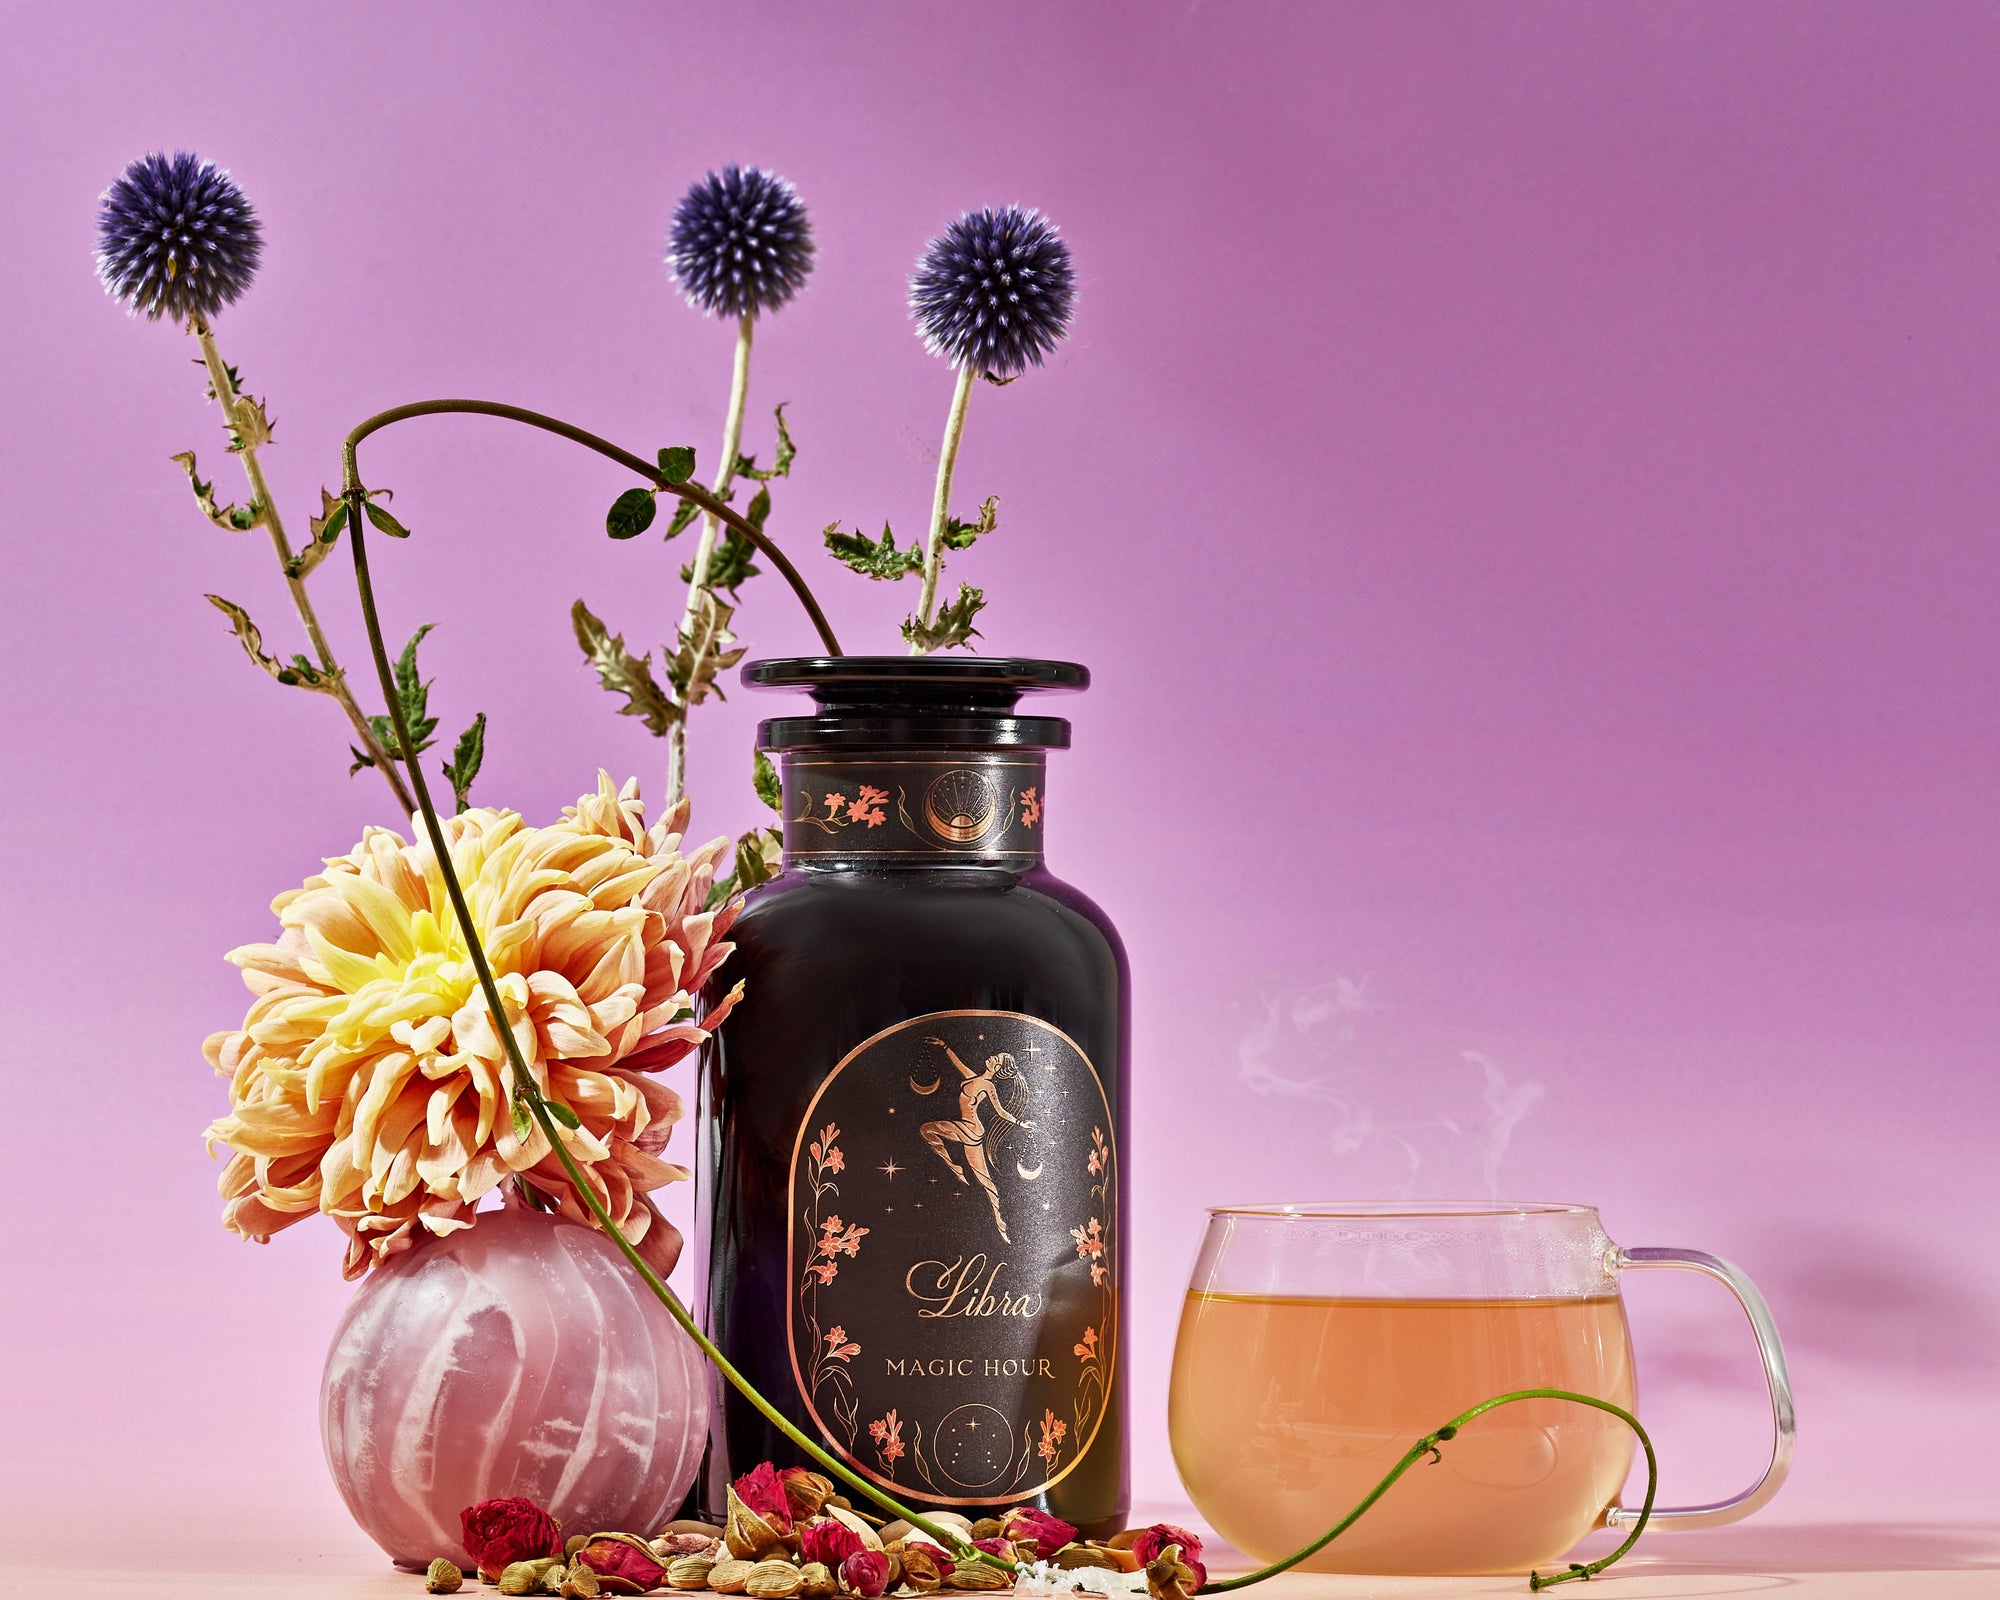 A pink and purple-toned still life image featuring a black bottle labeled "Magic Hour," adorned with intricate gold designs. Surrounding it are vibrant flowers, a glass teacup with steaming Libra- Pistachio-Rose Persian Love Cake Tea with White Pearls & Shatavari, dried herbs, and purple thistle-like flowers.